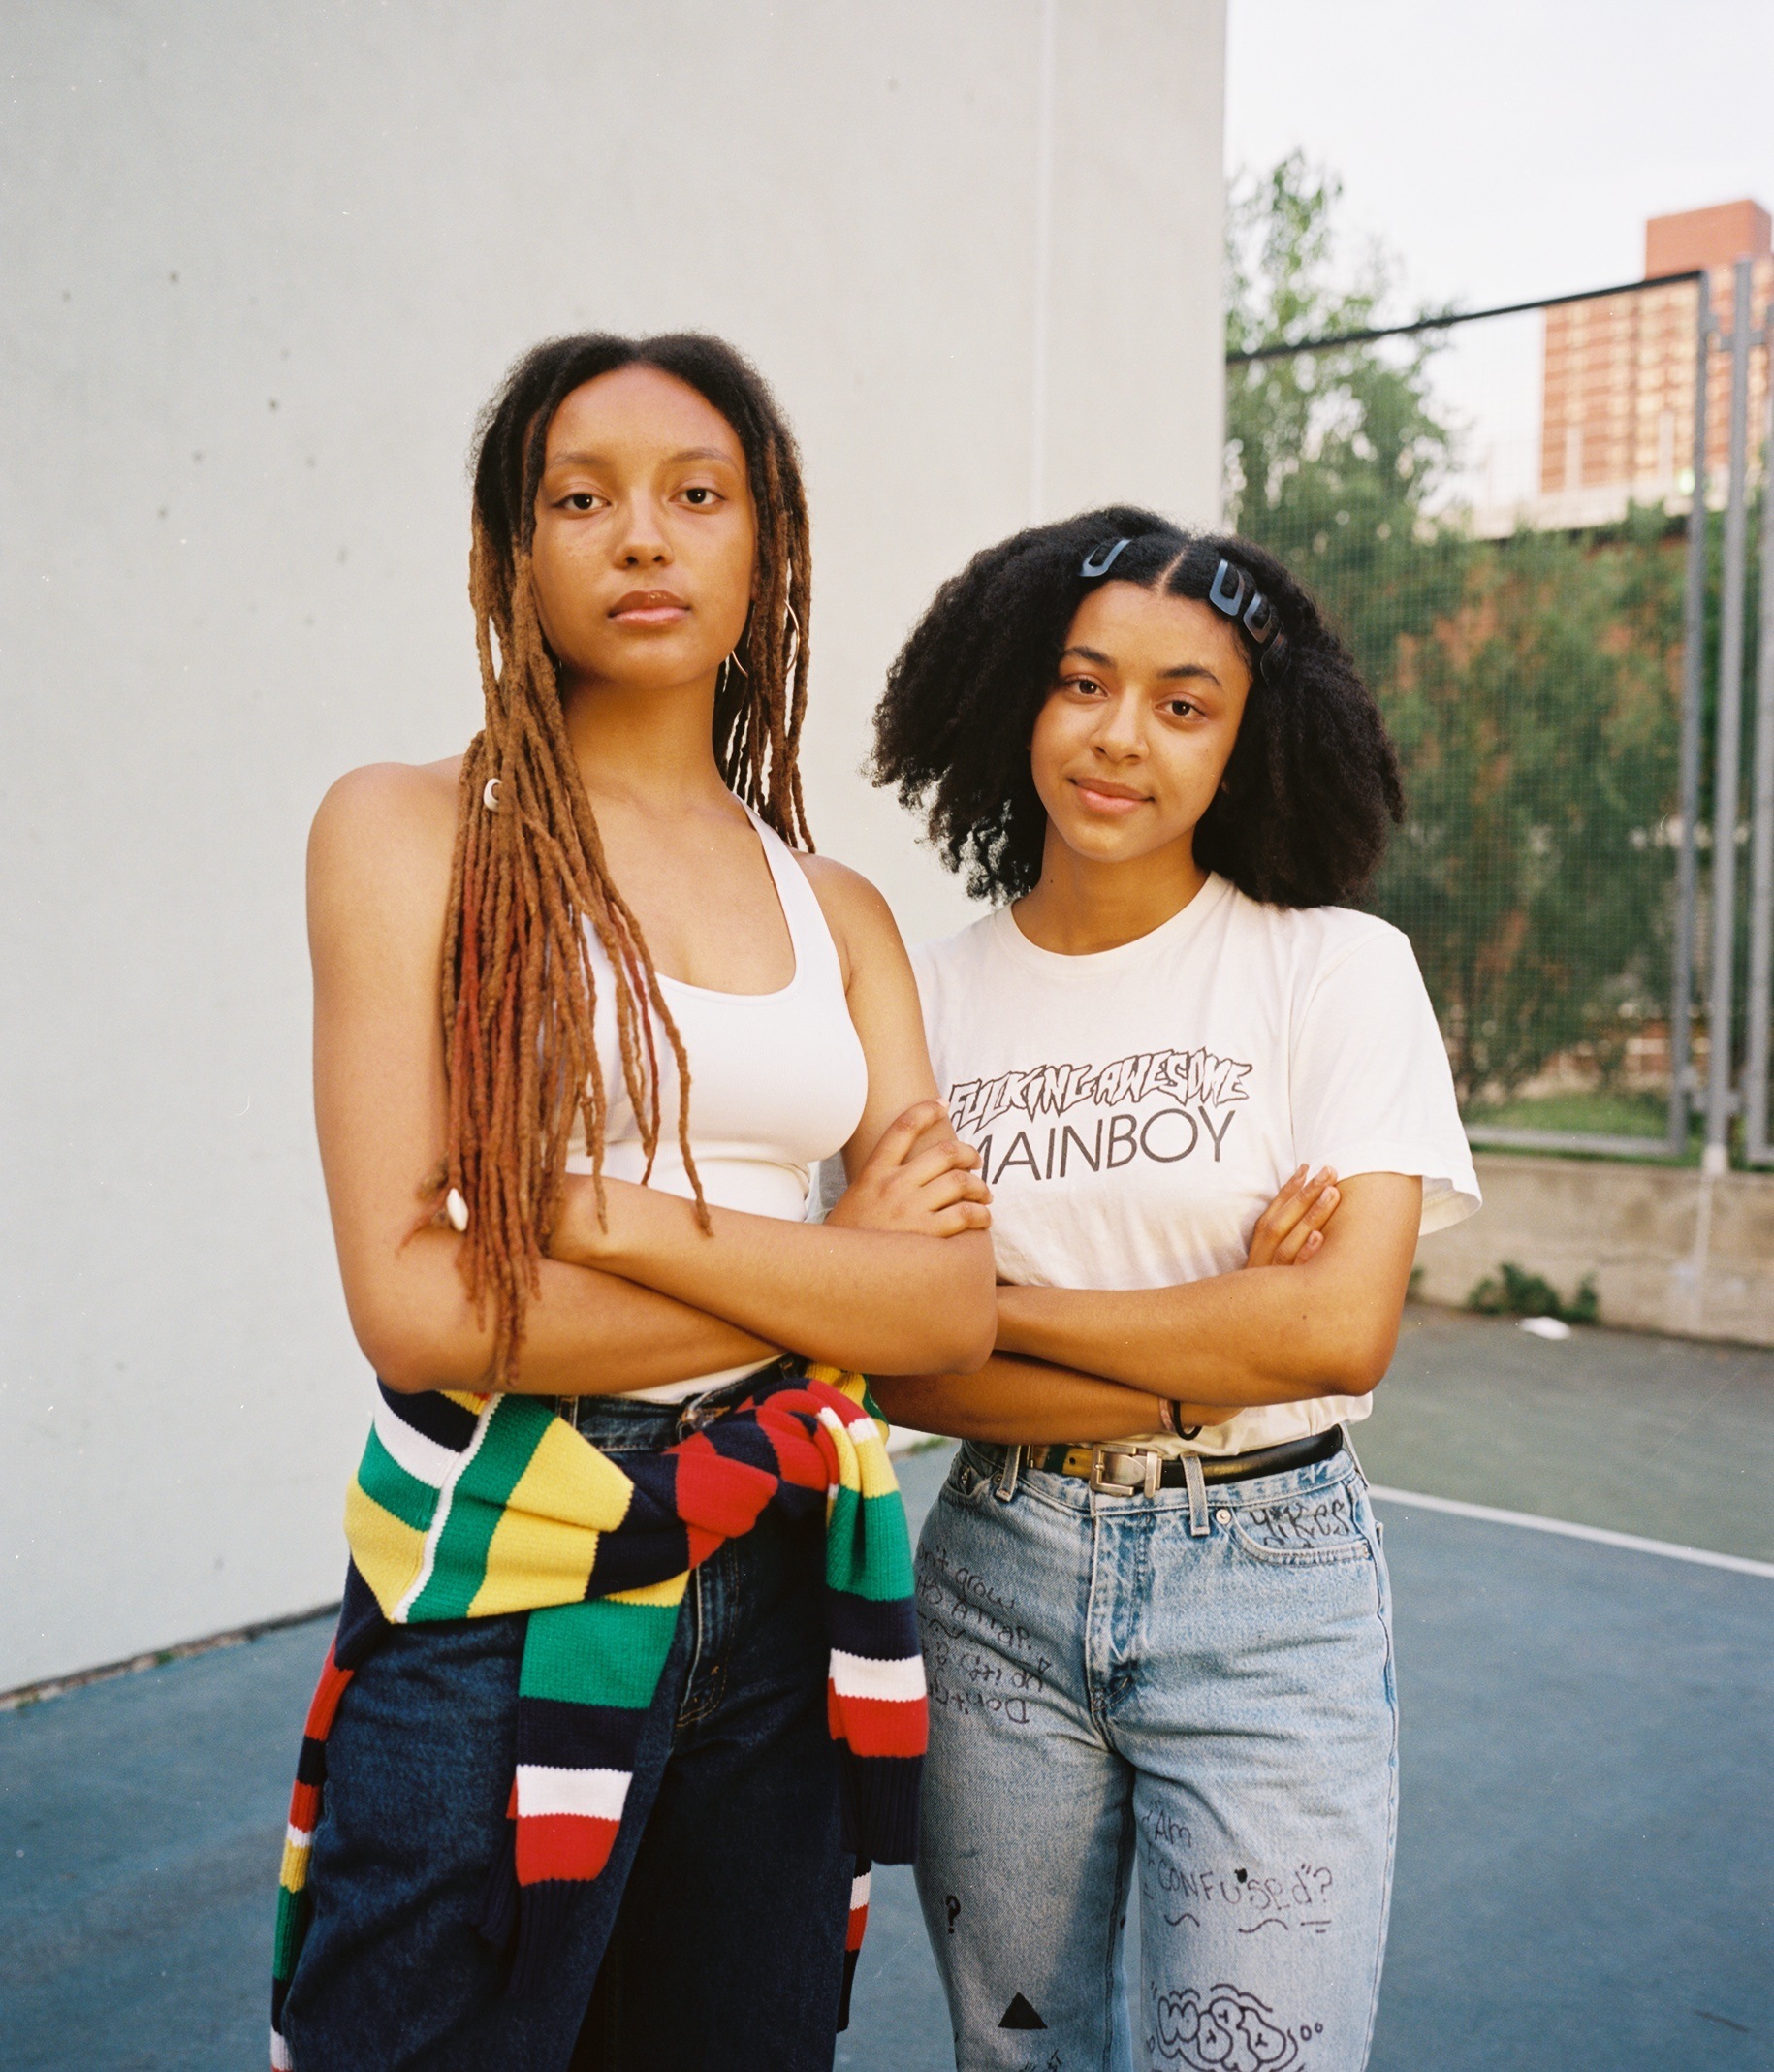 new york couples on love, friendship, and the importance of pride - i-D